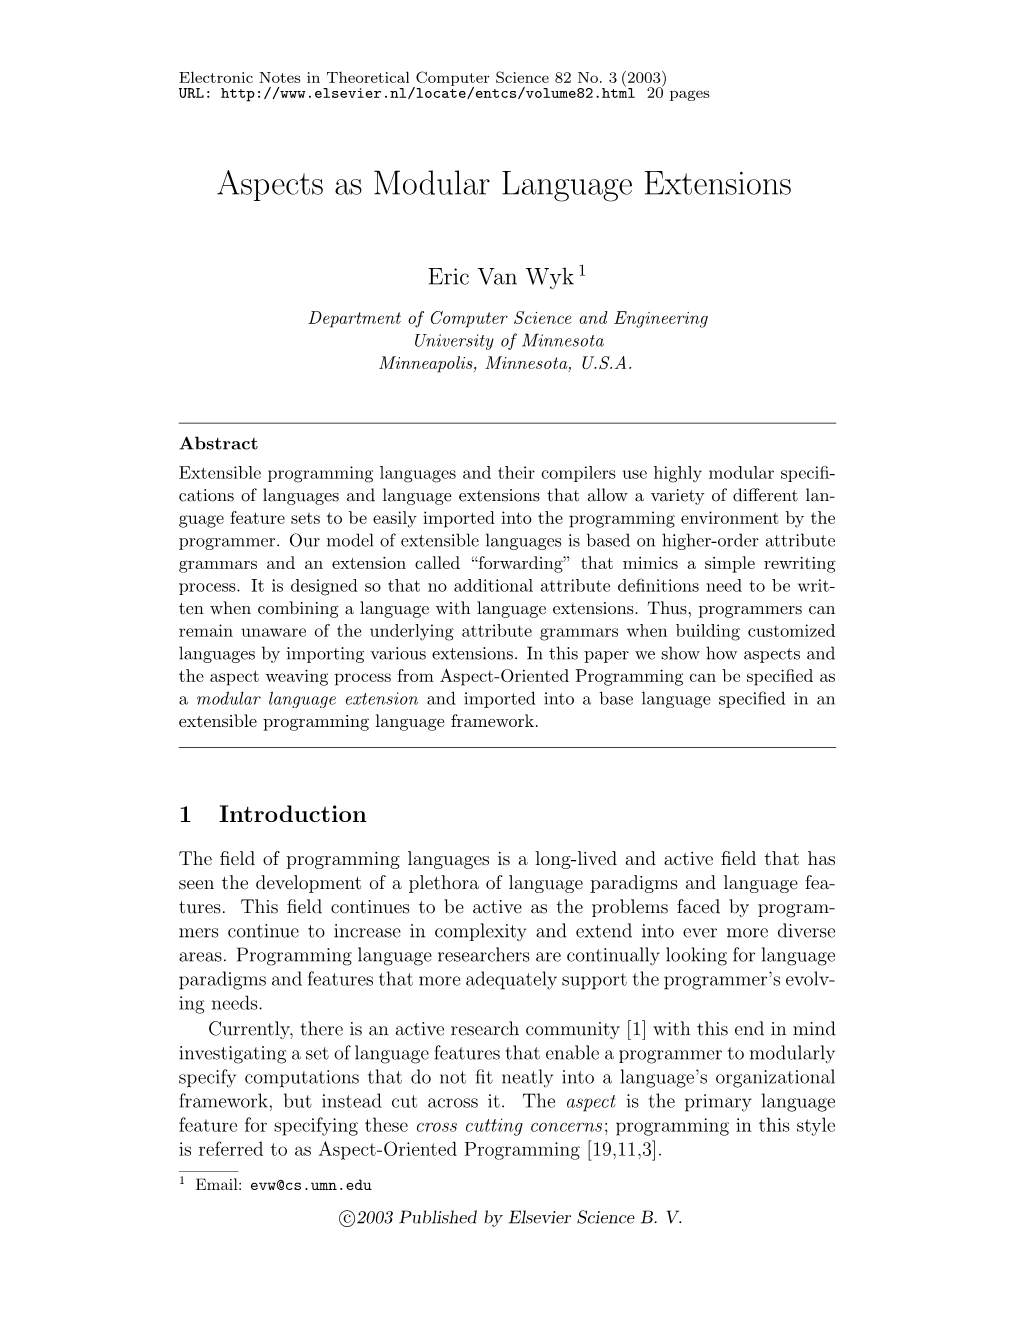 Aspects As Modular Language Extensions